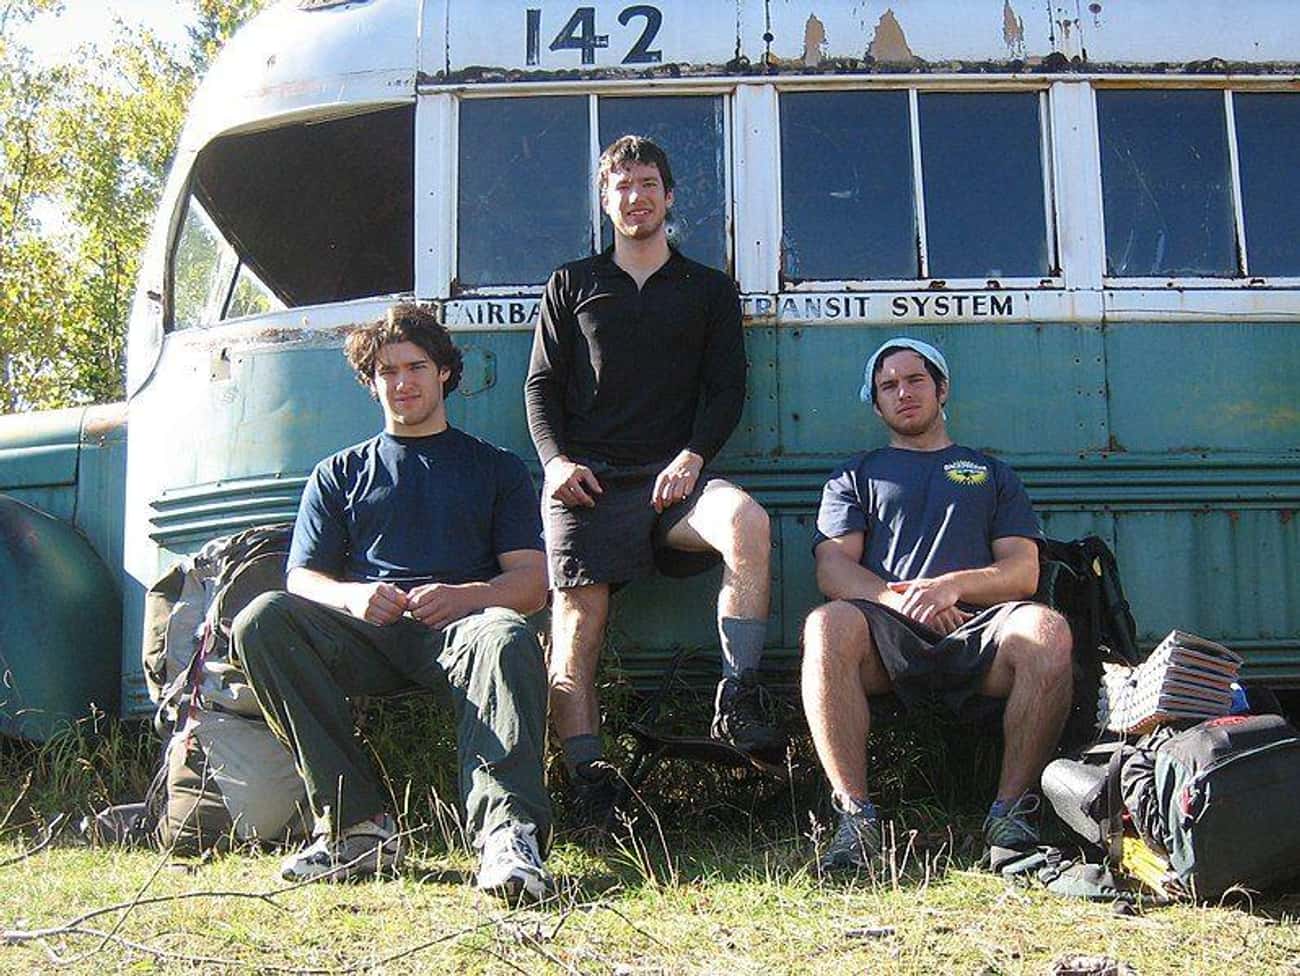 Bus 142 Became A Mecca For McCandless Devotees, But The Journey Was Dangerous